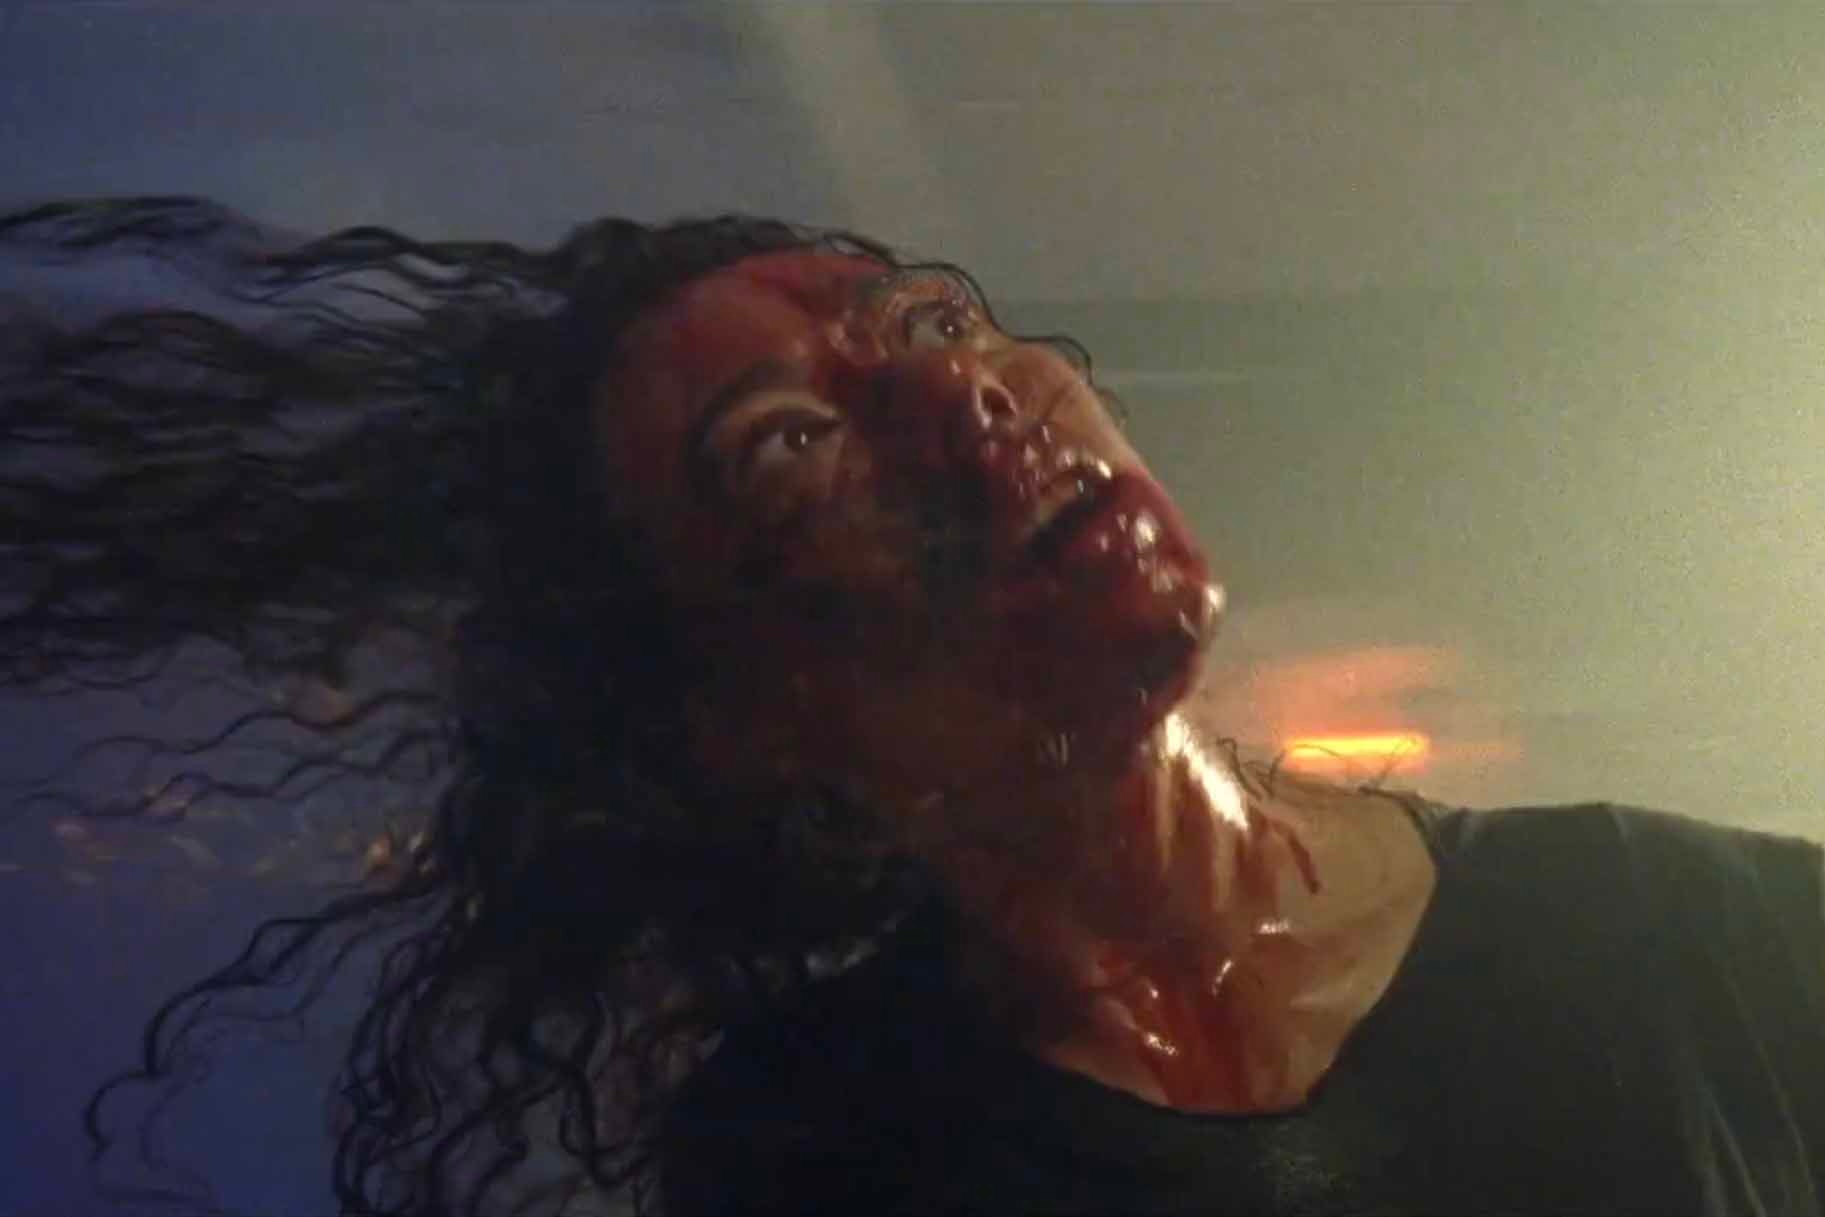 Dezzy (Dora Madison Burge) is covered in blood in Bliss (2019).